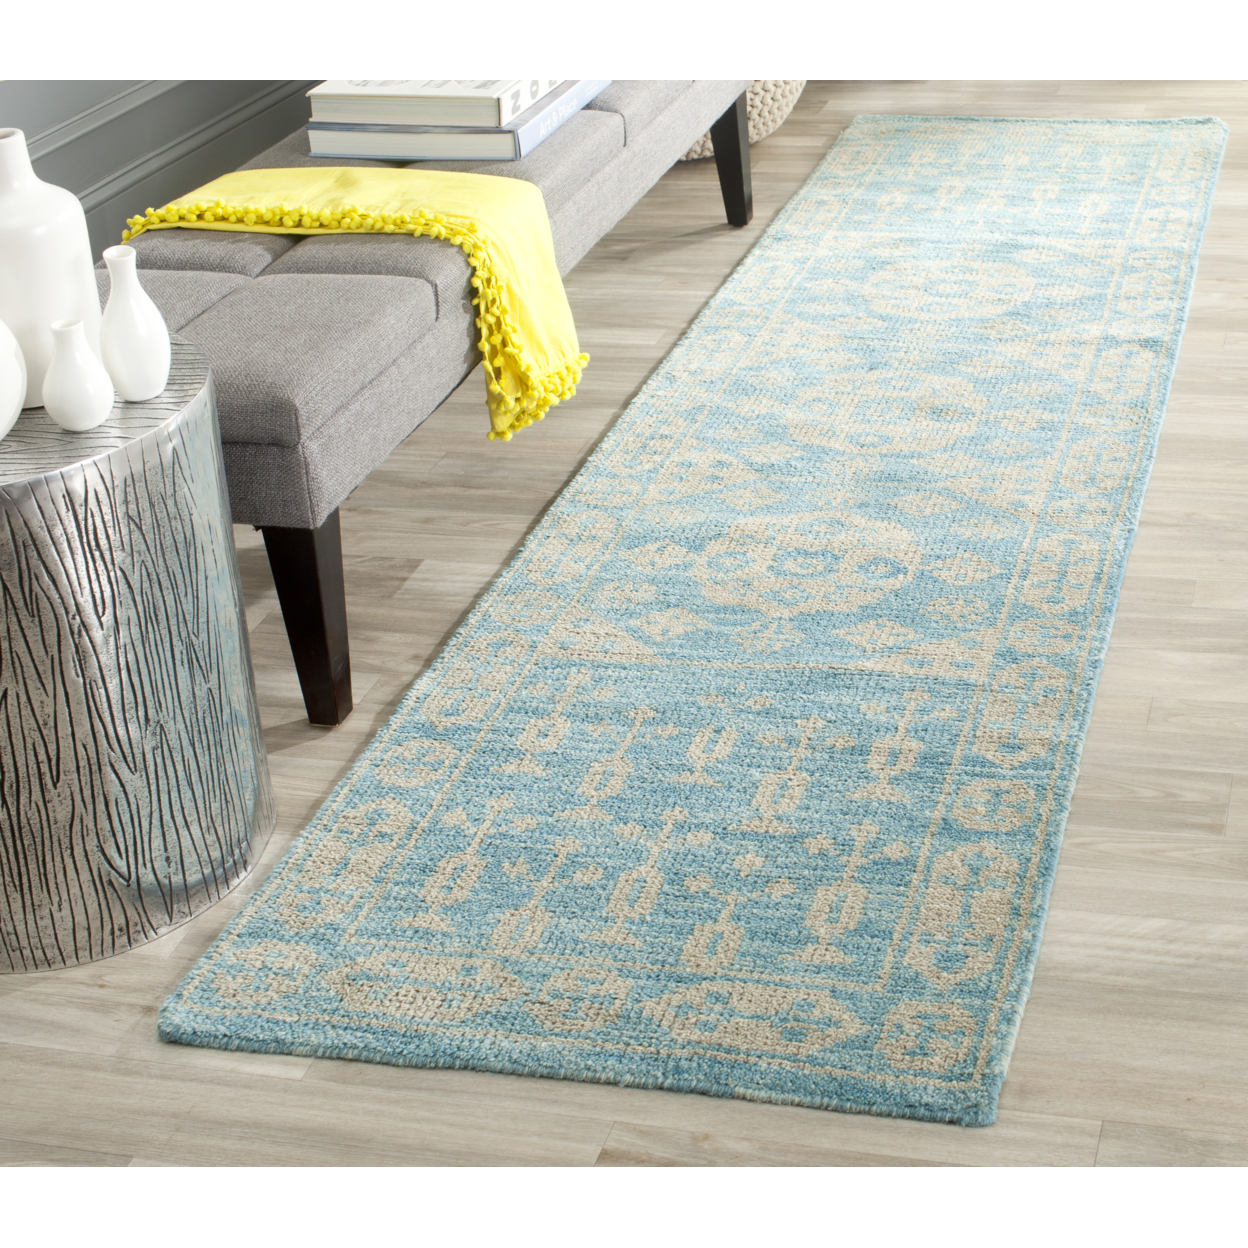 SAFAVIEH Kenya Collection KNY683A Hand-knotted Blue Rug - 4' X 6'